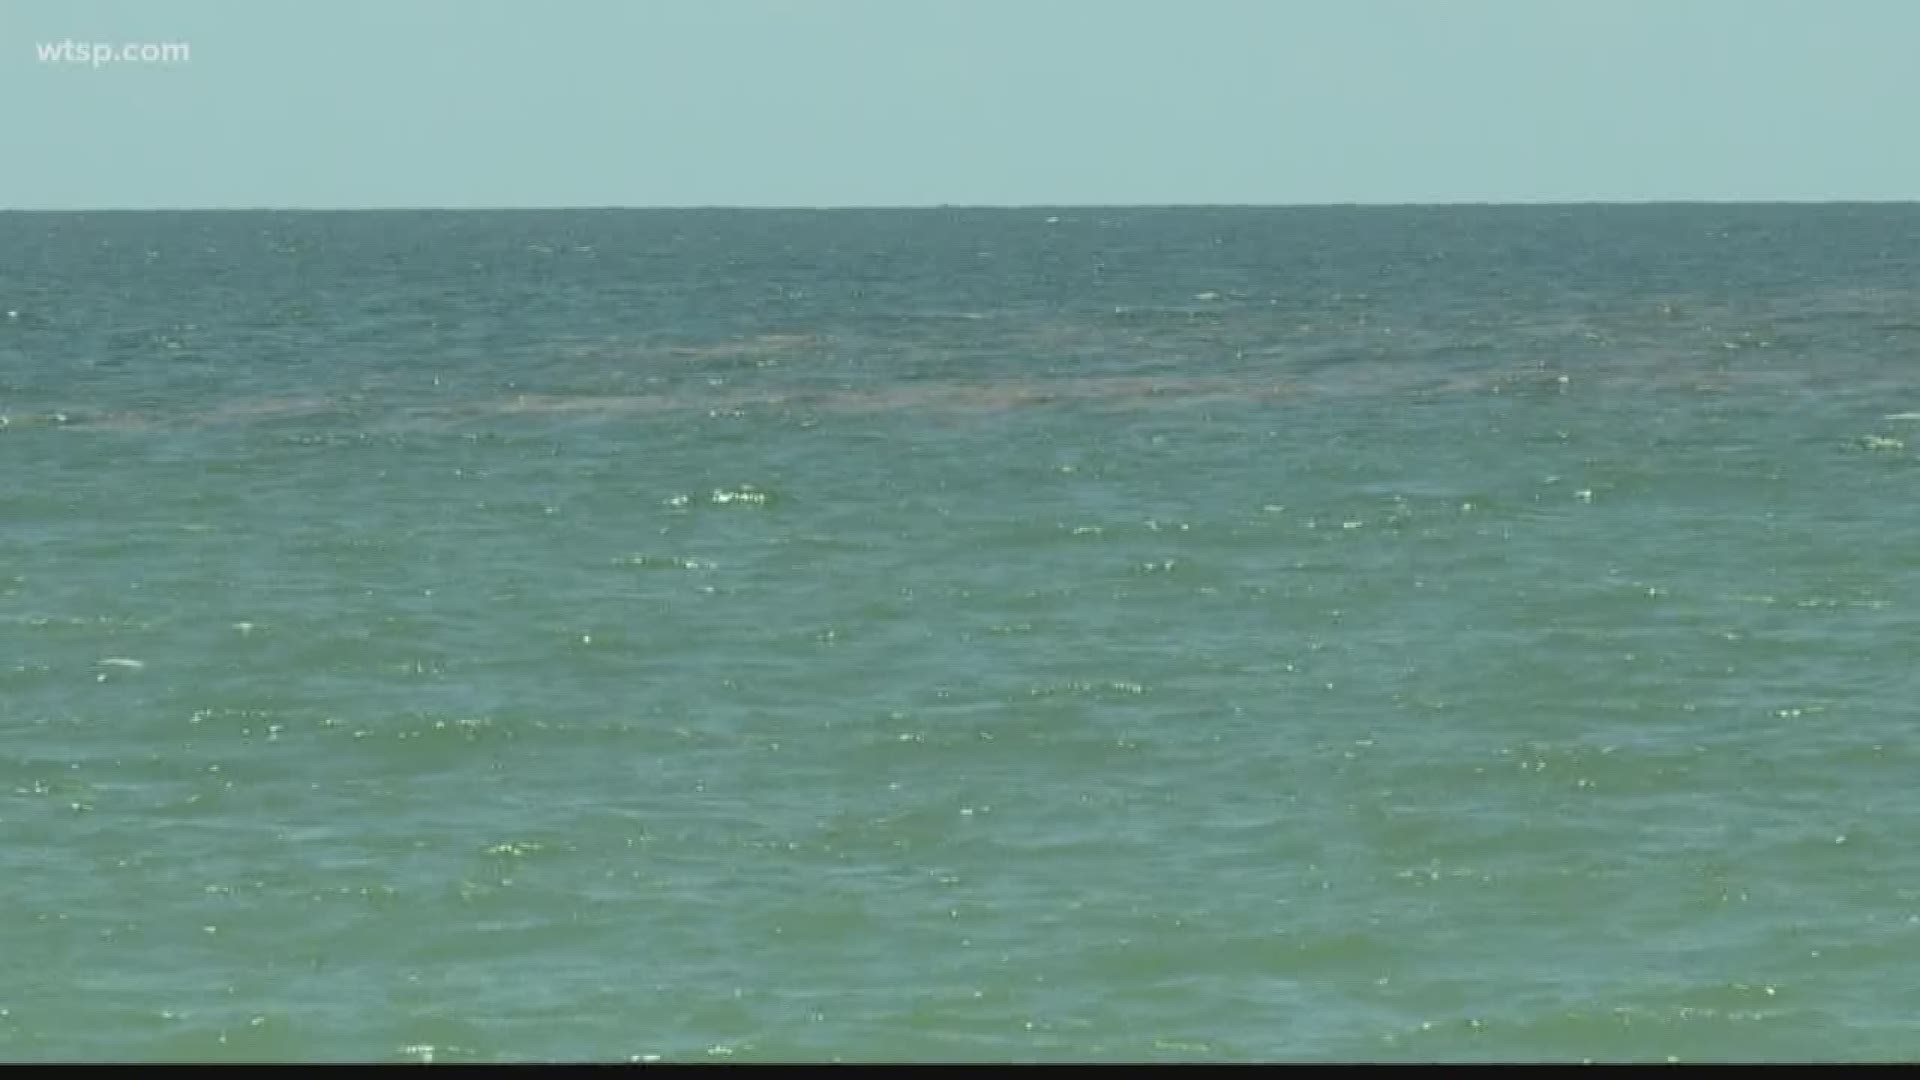 Don’t worry, the brown algae reported in Casey Key in Sarasota is not toxic like the red tide bloom that devastated Florida’s Gulf Coast last summer.

University of Florida Sarasota-Manatee professor Brett Blackburn says while it looks bad and even smells bad, it’s not a health threat. https://on.wtsp.com/2OKoaBb